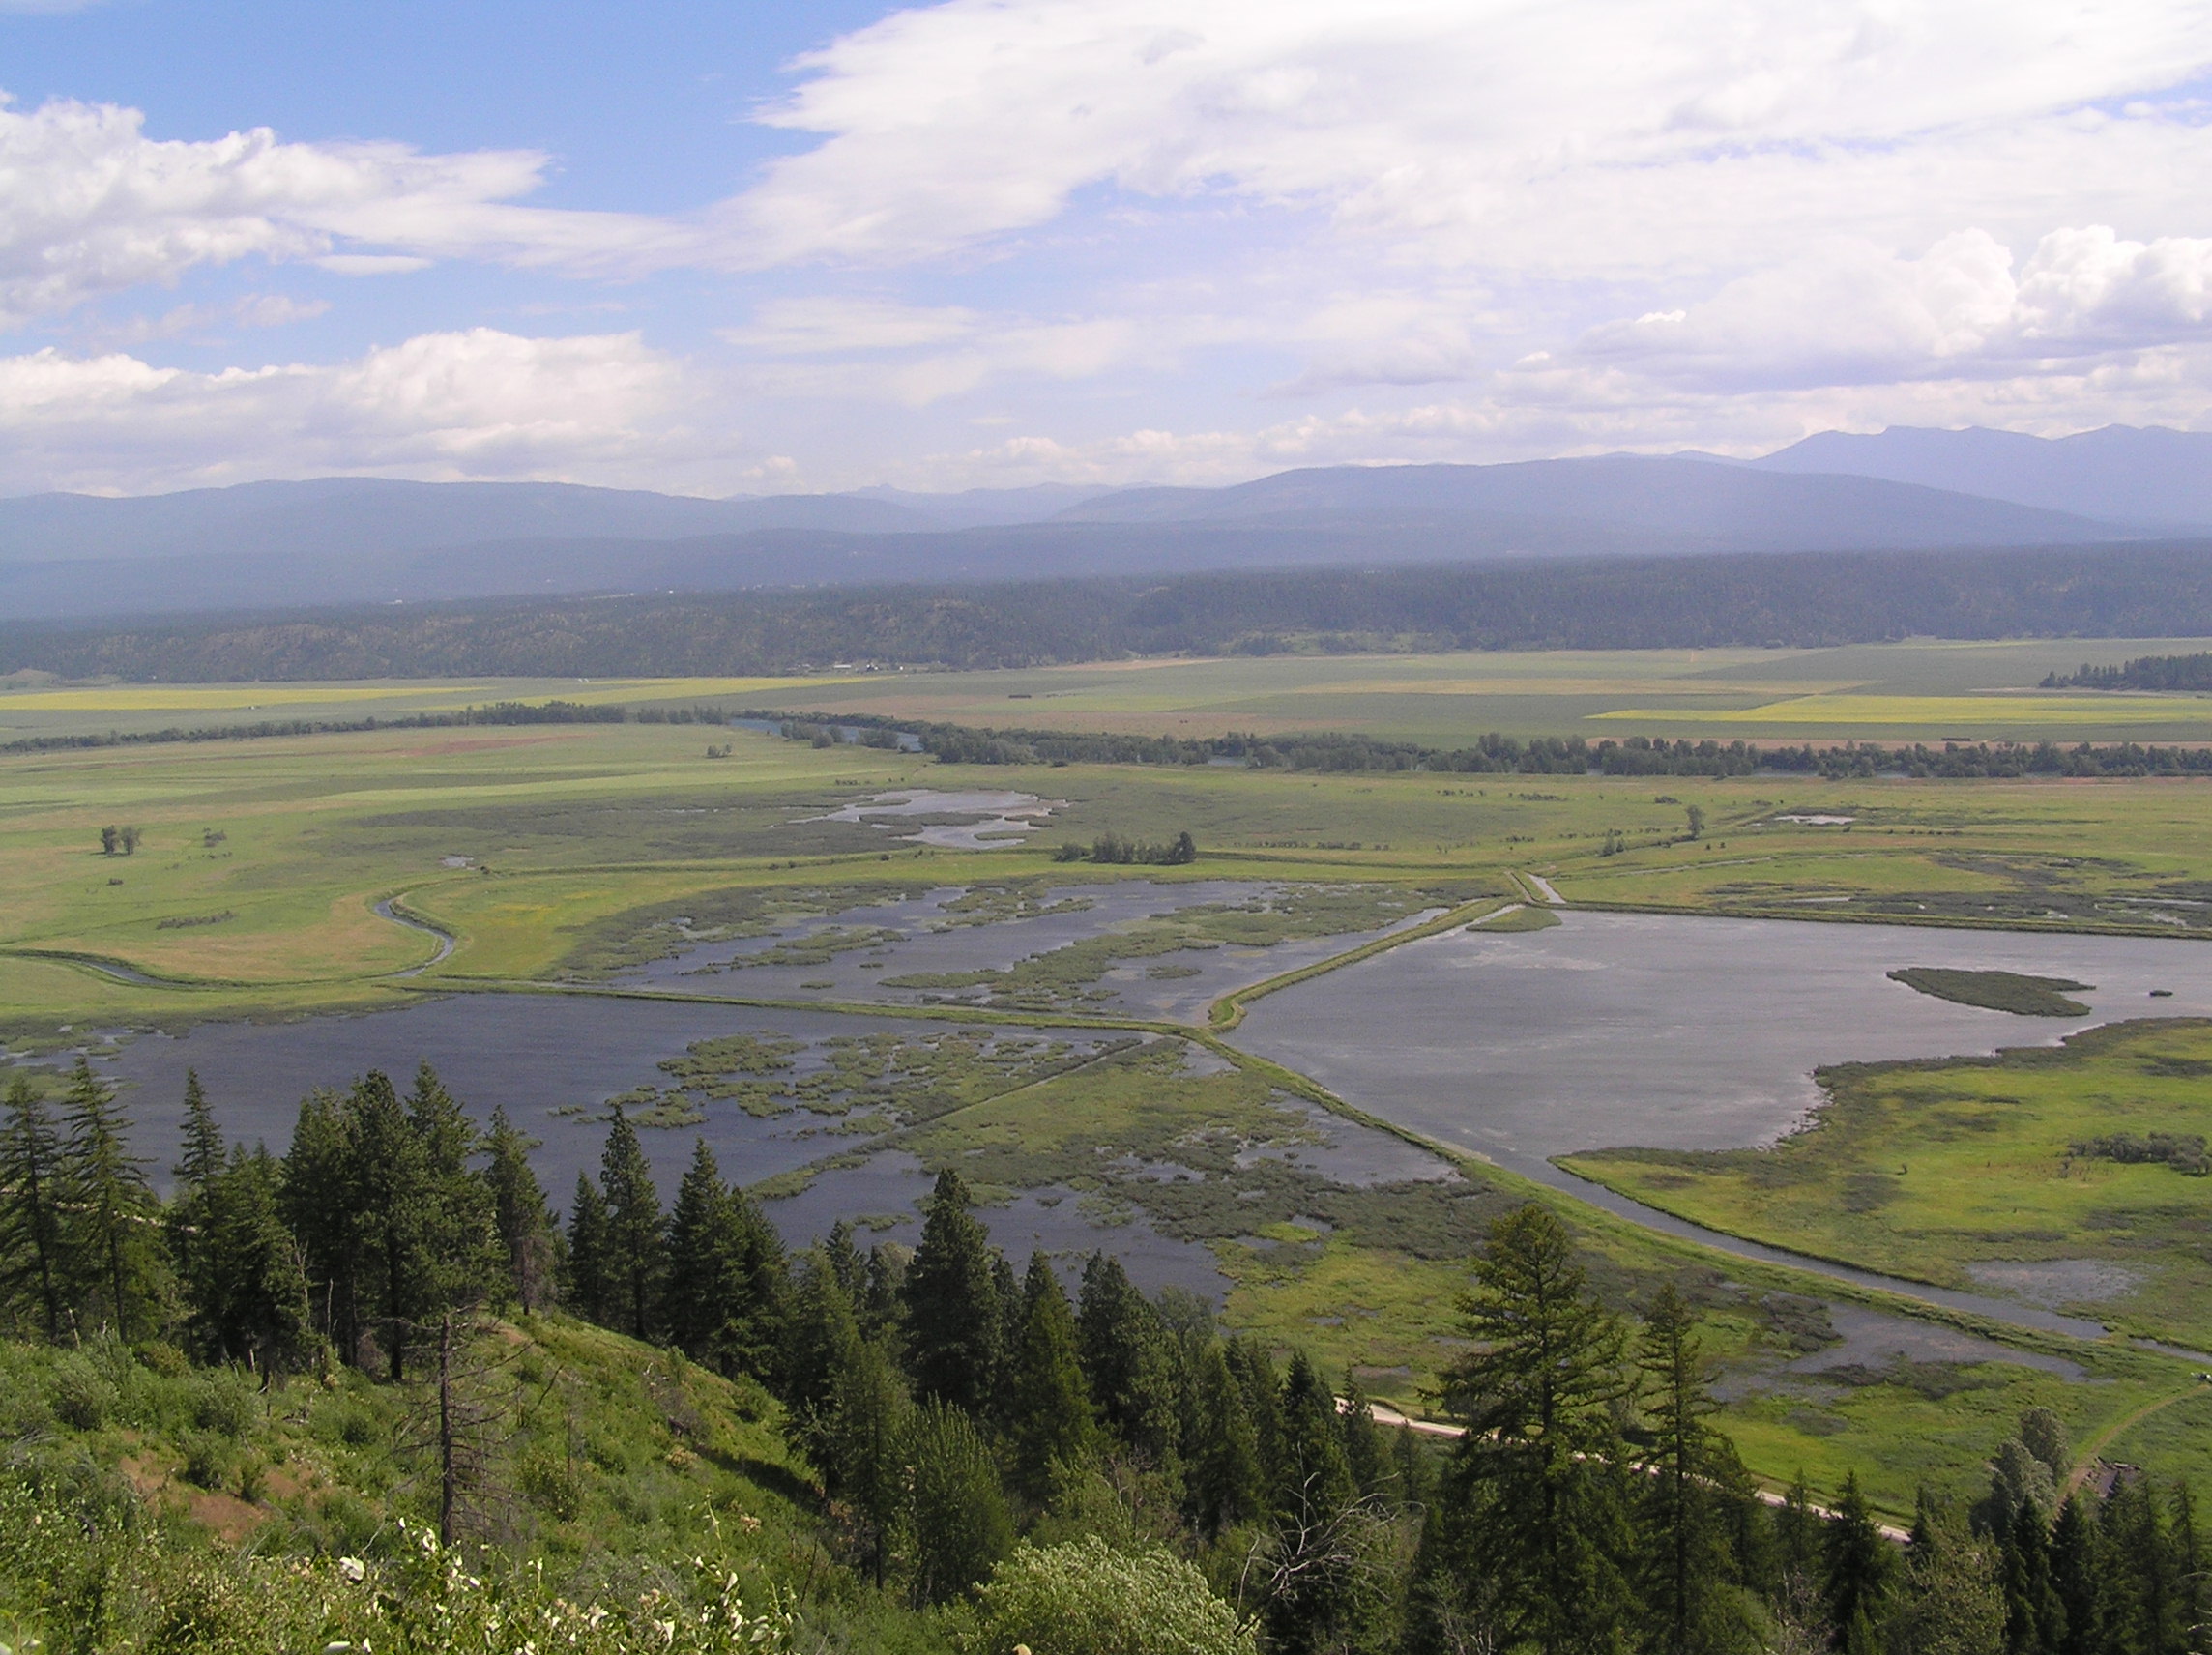 This oblique view of Kootenai shows the different wetland units managed for waterfowl.